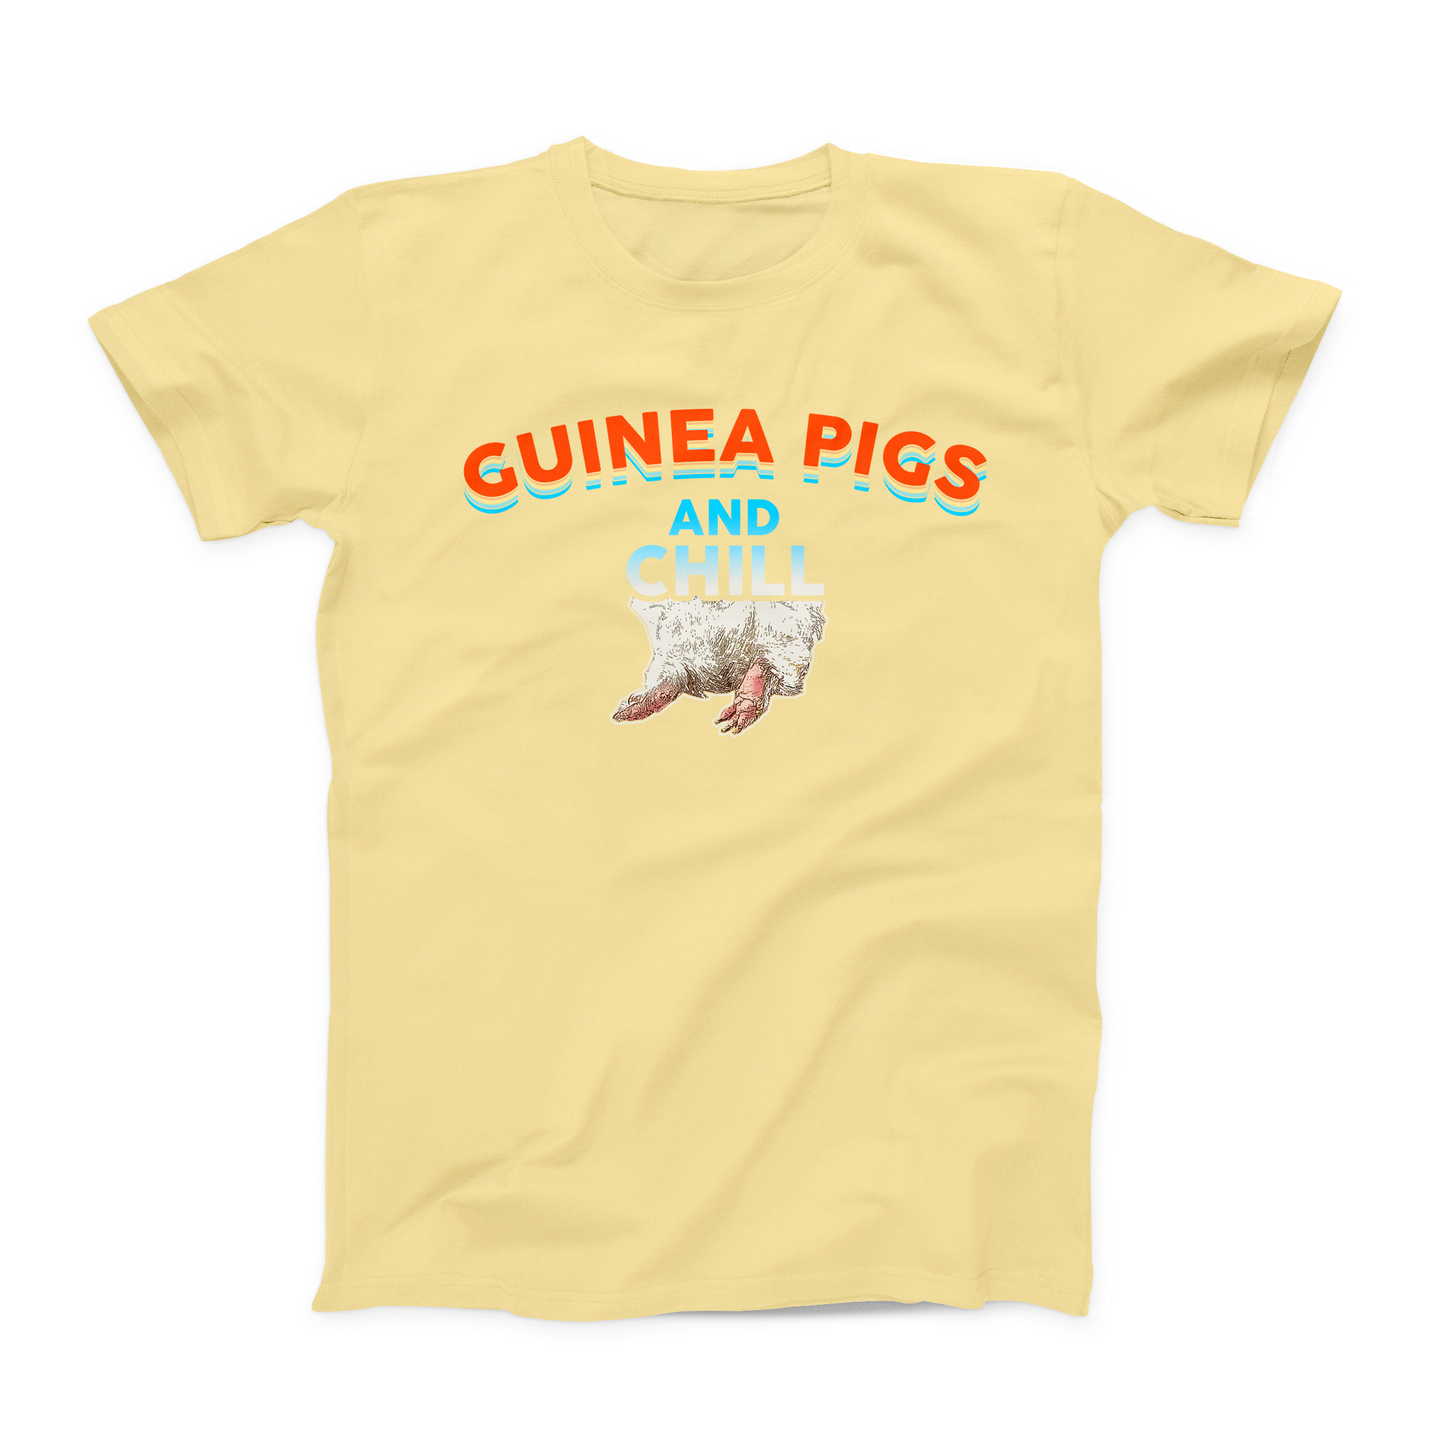 GUINEA PIGS AND CHILL Adult T-Shirt : Guinea Pig Jungle Shirt: Unisex